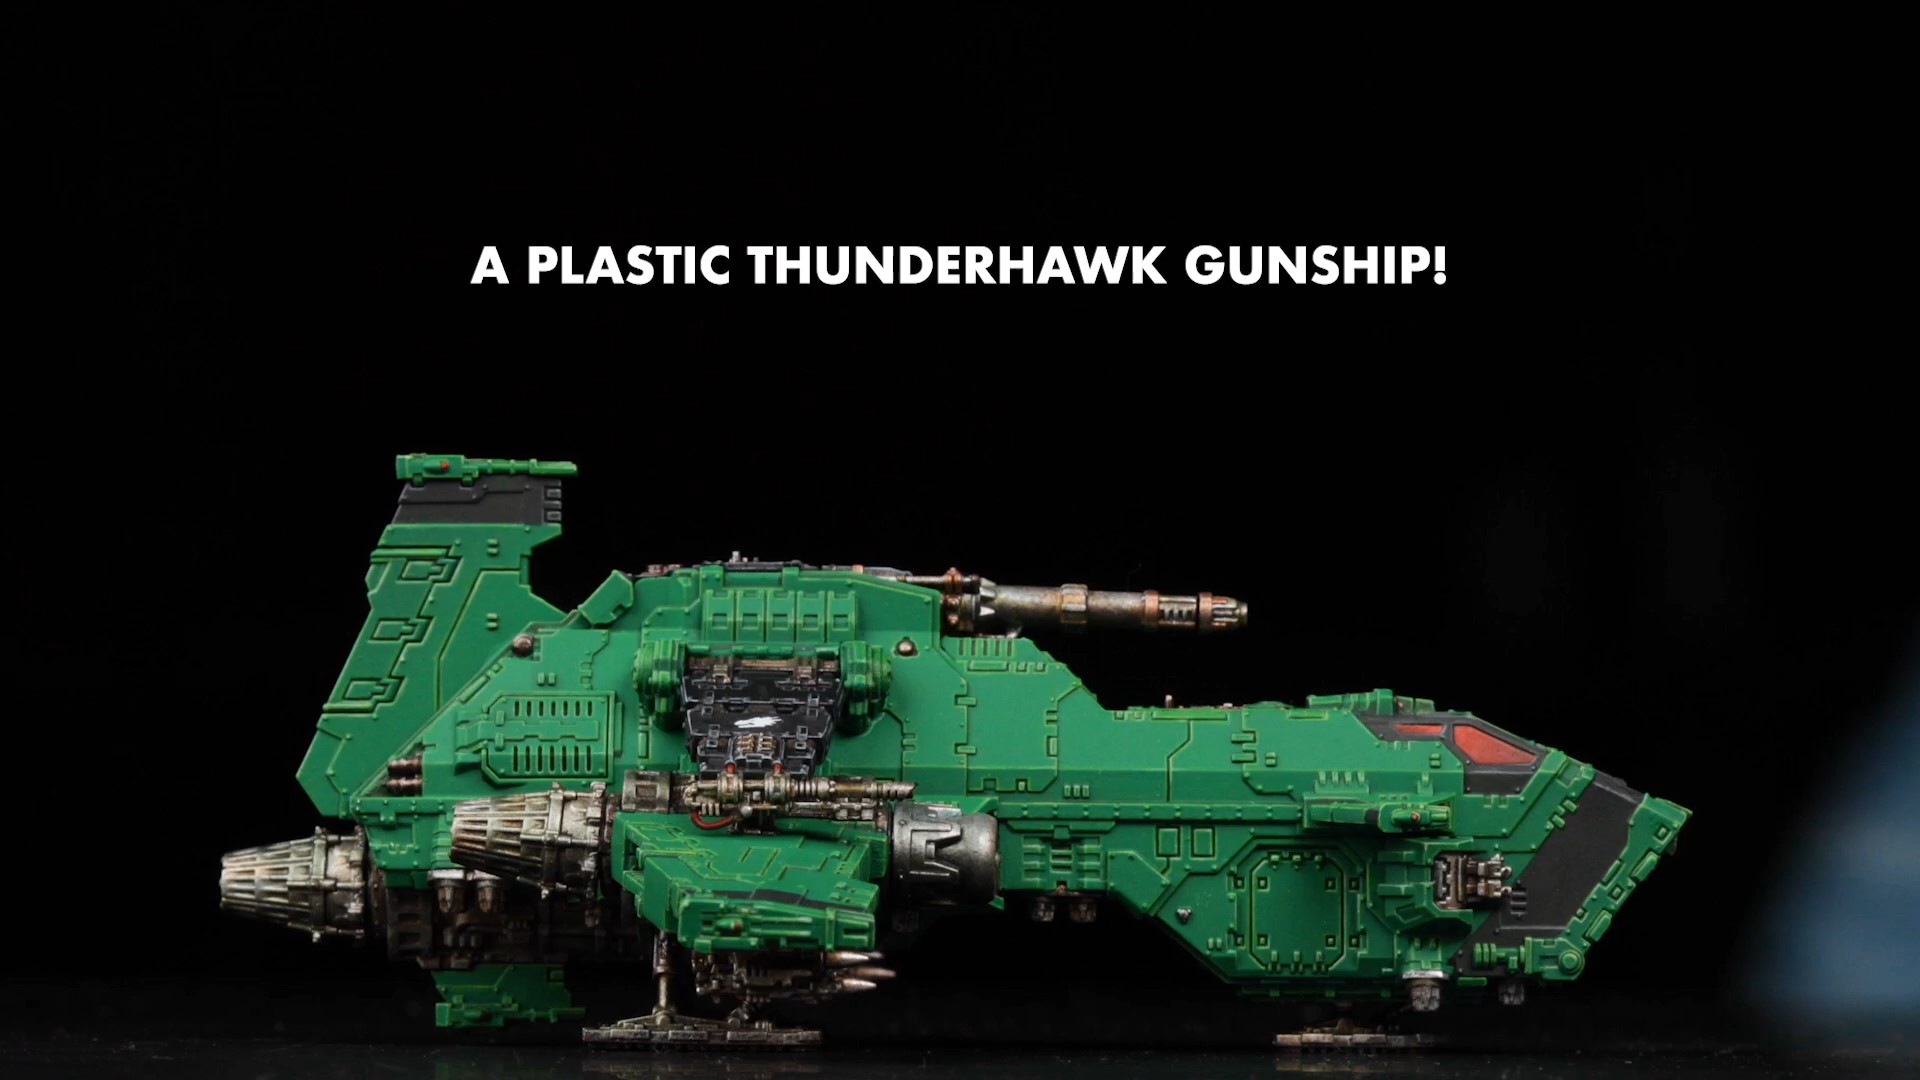 A Thunderhawk Gunship model shown on a black background with white happy text identifying it